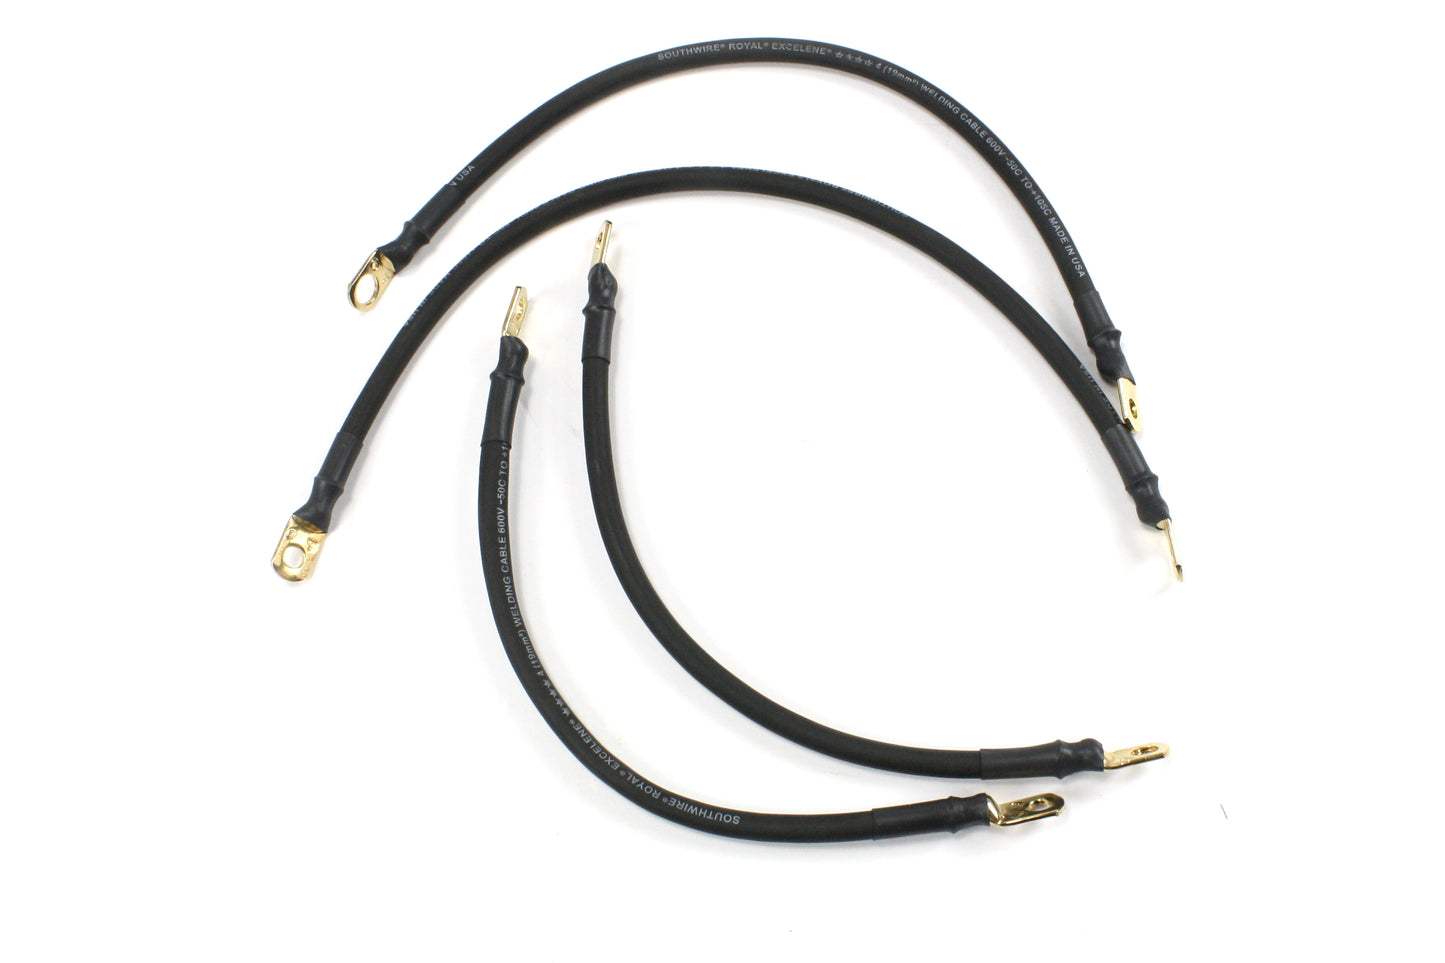 Spyke 419084 - Battery Cables for 84-88 FXST and FLST